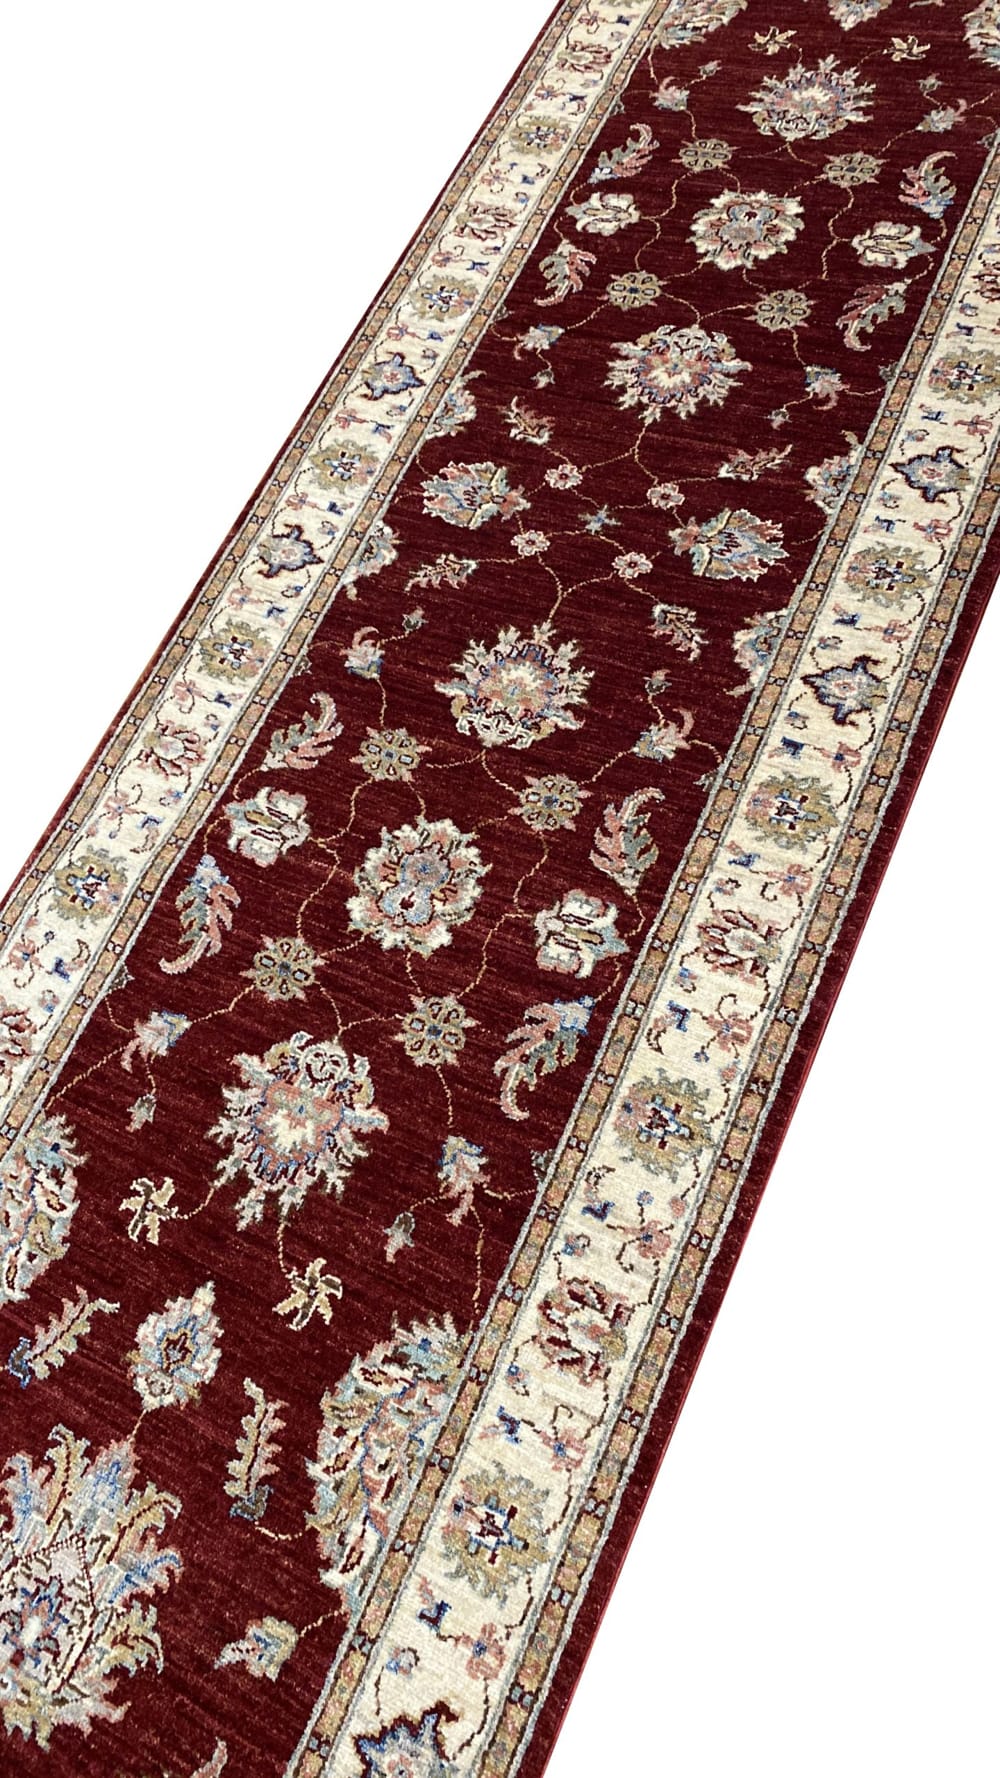 Rug# 24983, Afghan Turkaman weave, 19th c Sultanabad design, HSW, V.D, size 296x84 cm RRP $2300, Special $900 (2)